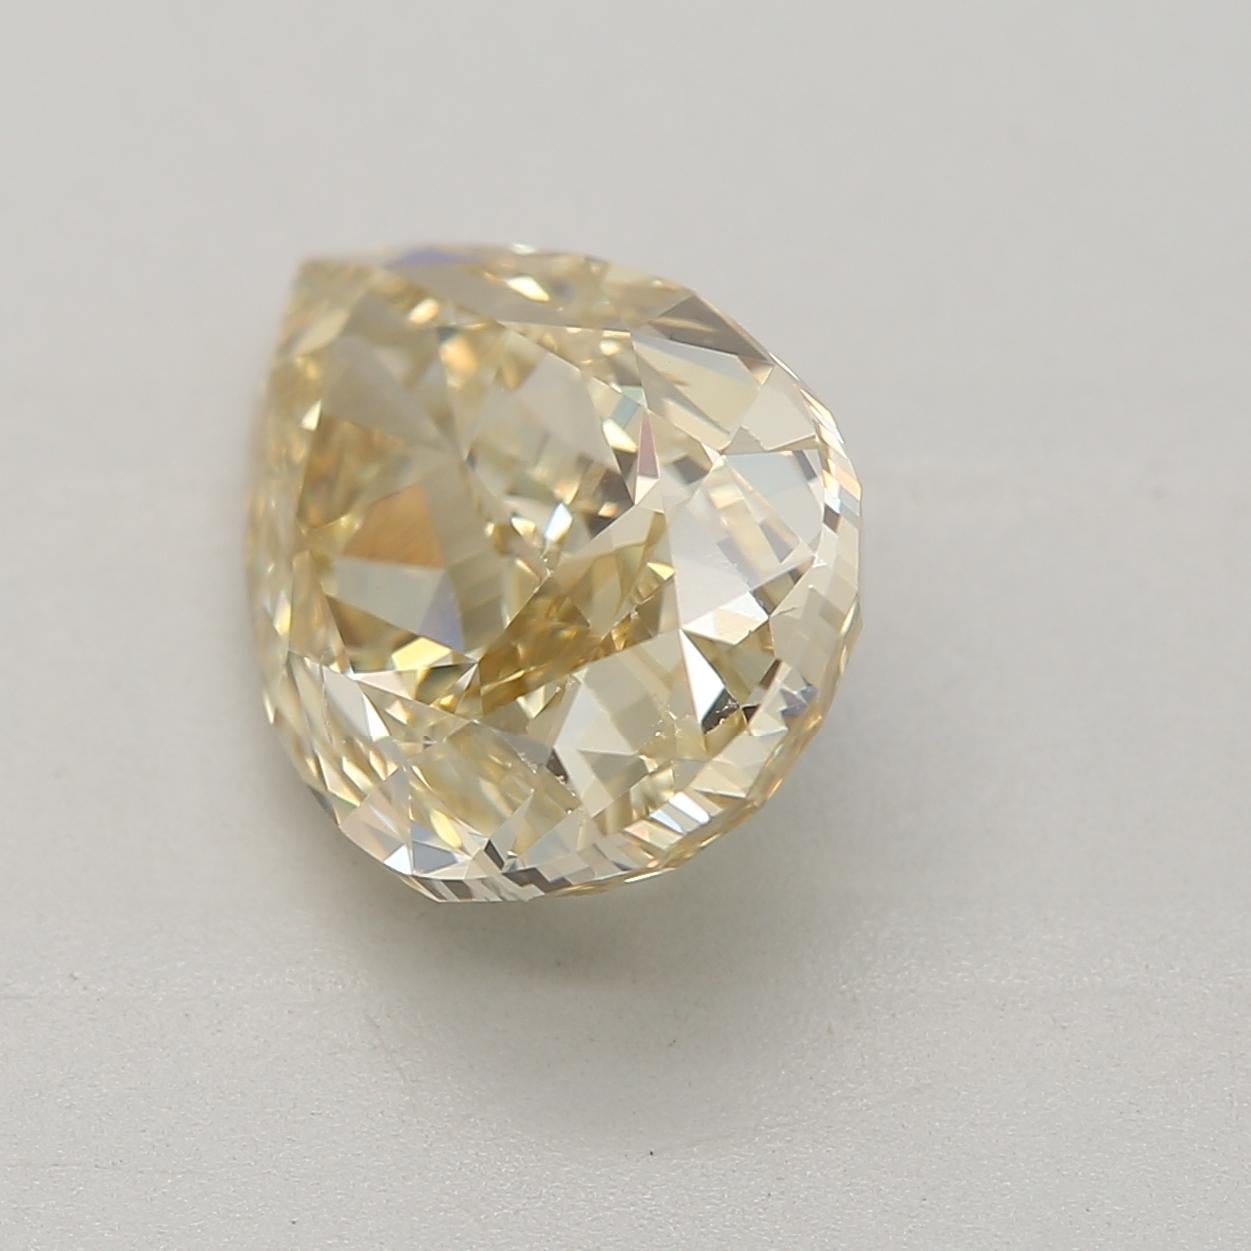 *100% NATURAL FANCY COLOUR DIAMOND*

✪ Diamond Details ✪

➛ Shape: Pear
➛ Colour Grade: Fancy Brownish Yellow
➛ Carat: 2.00
➛ Clarity: SI1
➛ GIA Certified 

^FEATURES OF THE DIAMOND^












Also, our GIA certified diamond is a diamond that has